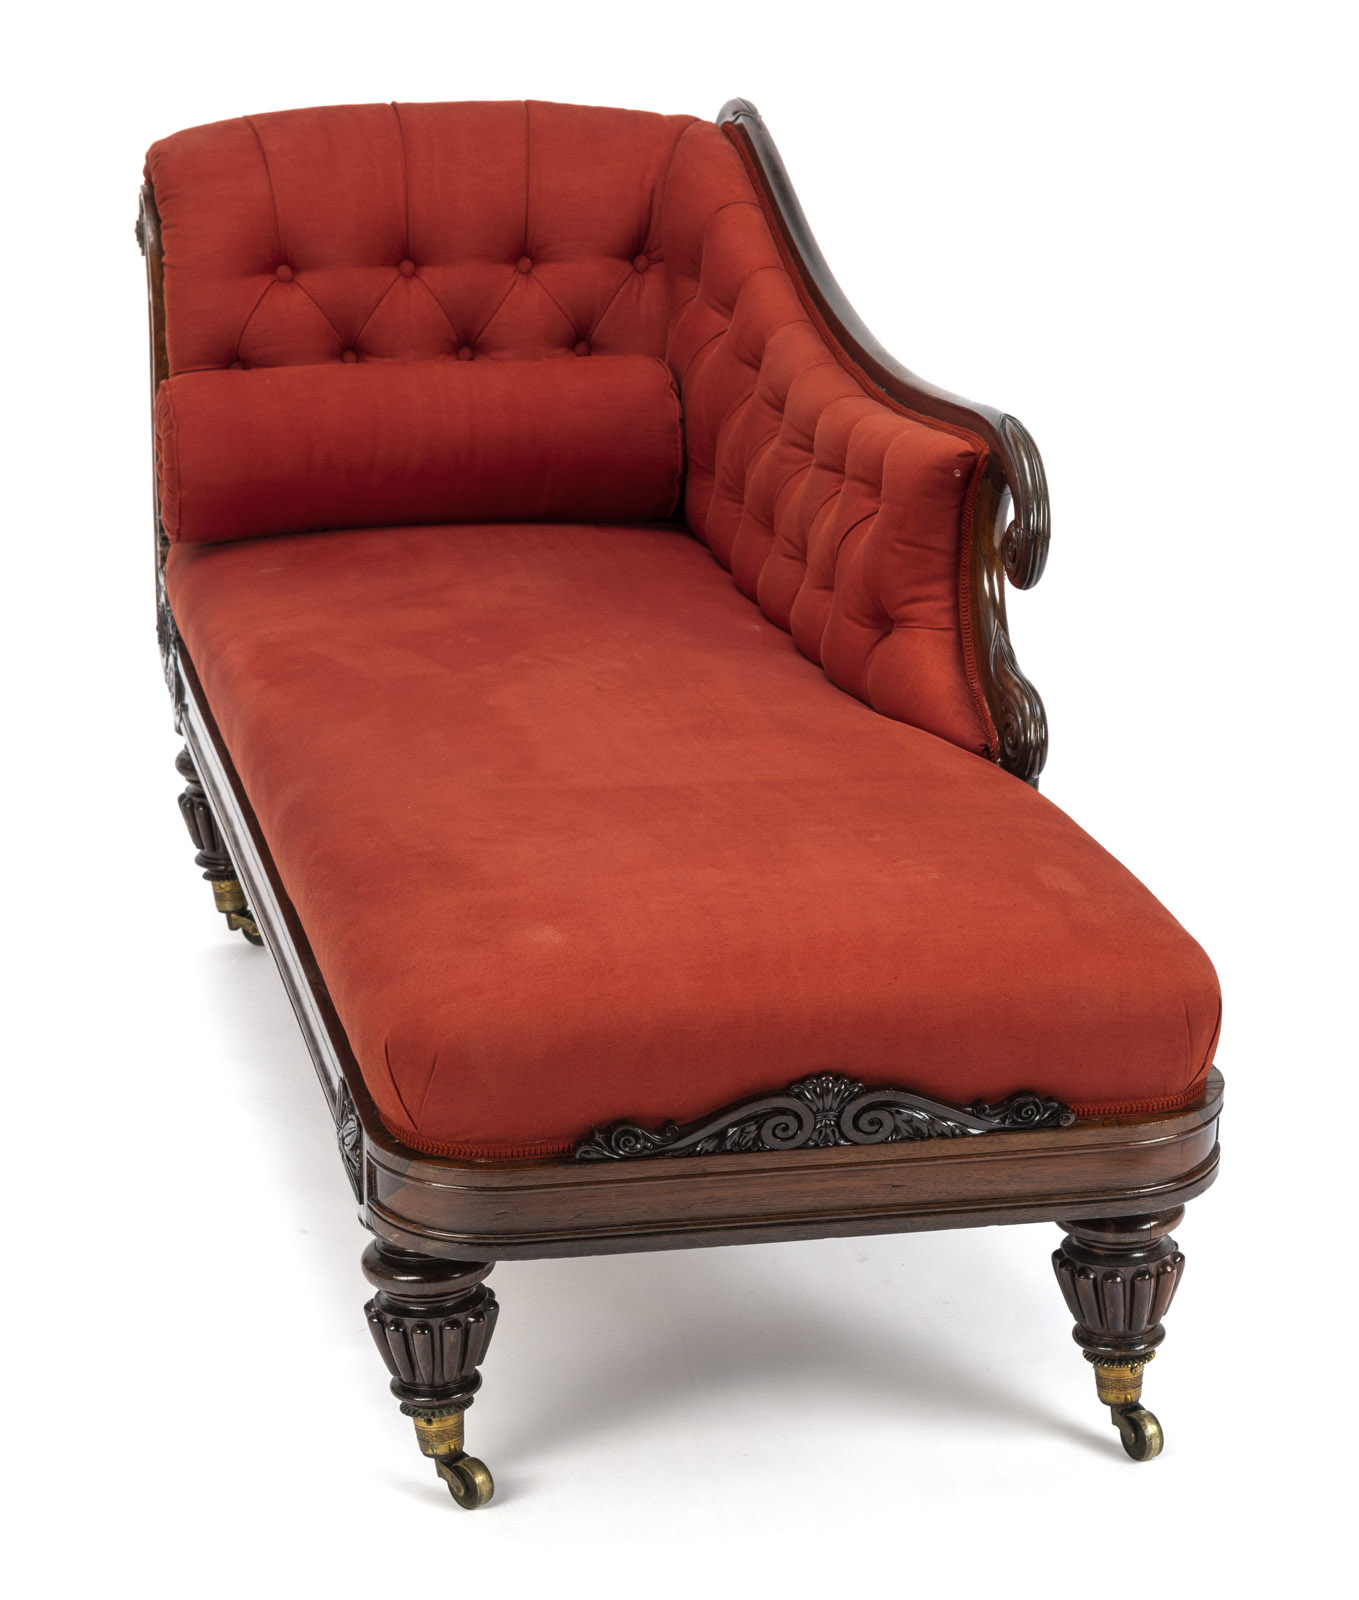 AN ENGLISH ROSEWOOD CHAISELONGUE - Image 2 of 4